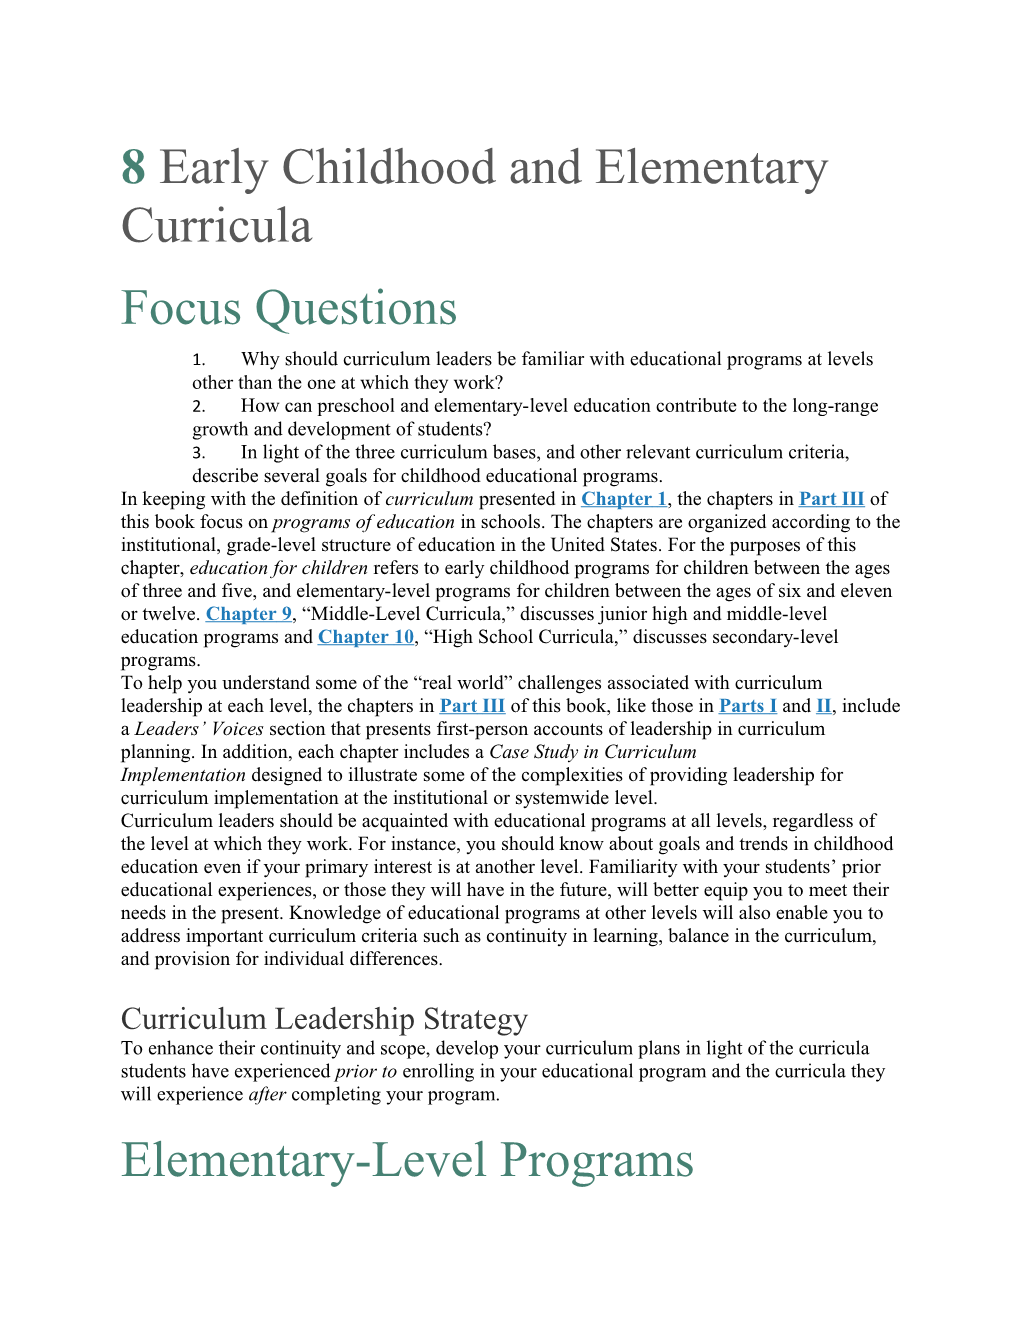 8Early Childhood and Elementary Curricula